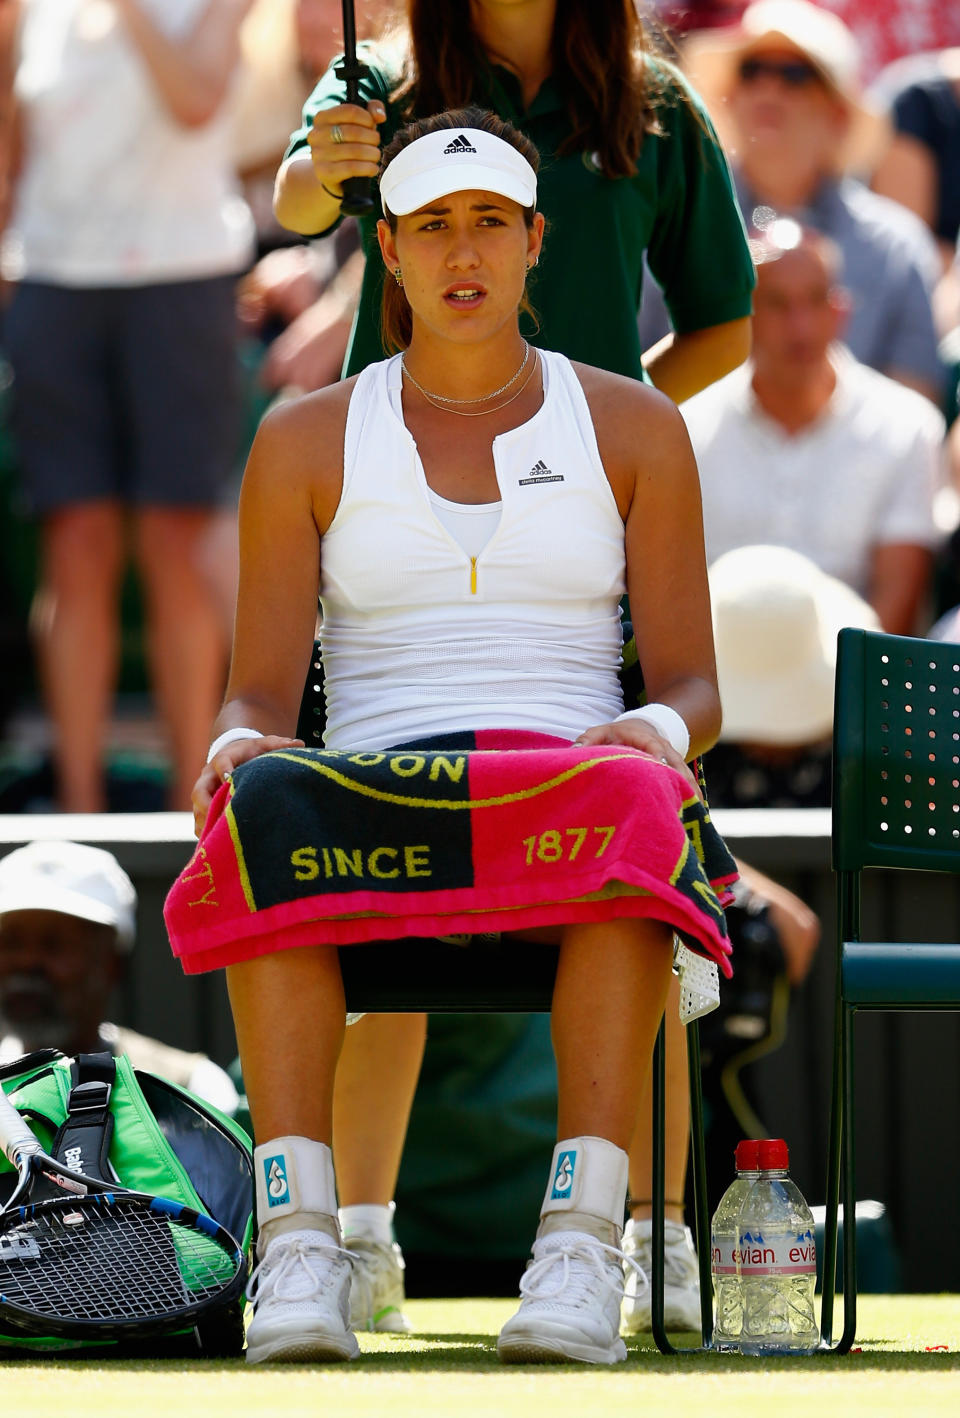 LONDON, ENGLAND - JULY 11:  Garbine Muguruza of Spain looks dejected in the Final Of The Ladies' Singles against Serena Williams of the United States during day twelve of the Wimbledon Lawn Tennis Championships at the All England Lawn Tennis and Croquet Club on July 11, 2015 in London, England.  (Photo by Julian Finney/Getty Images)